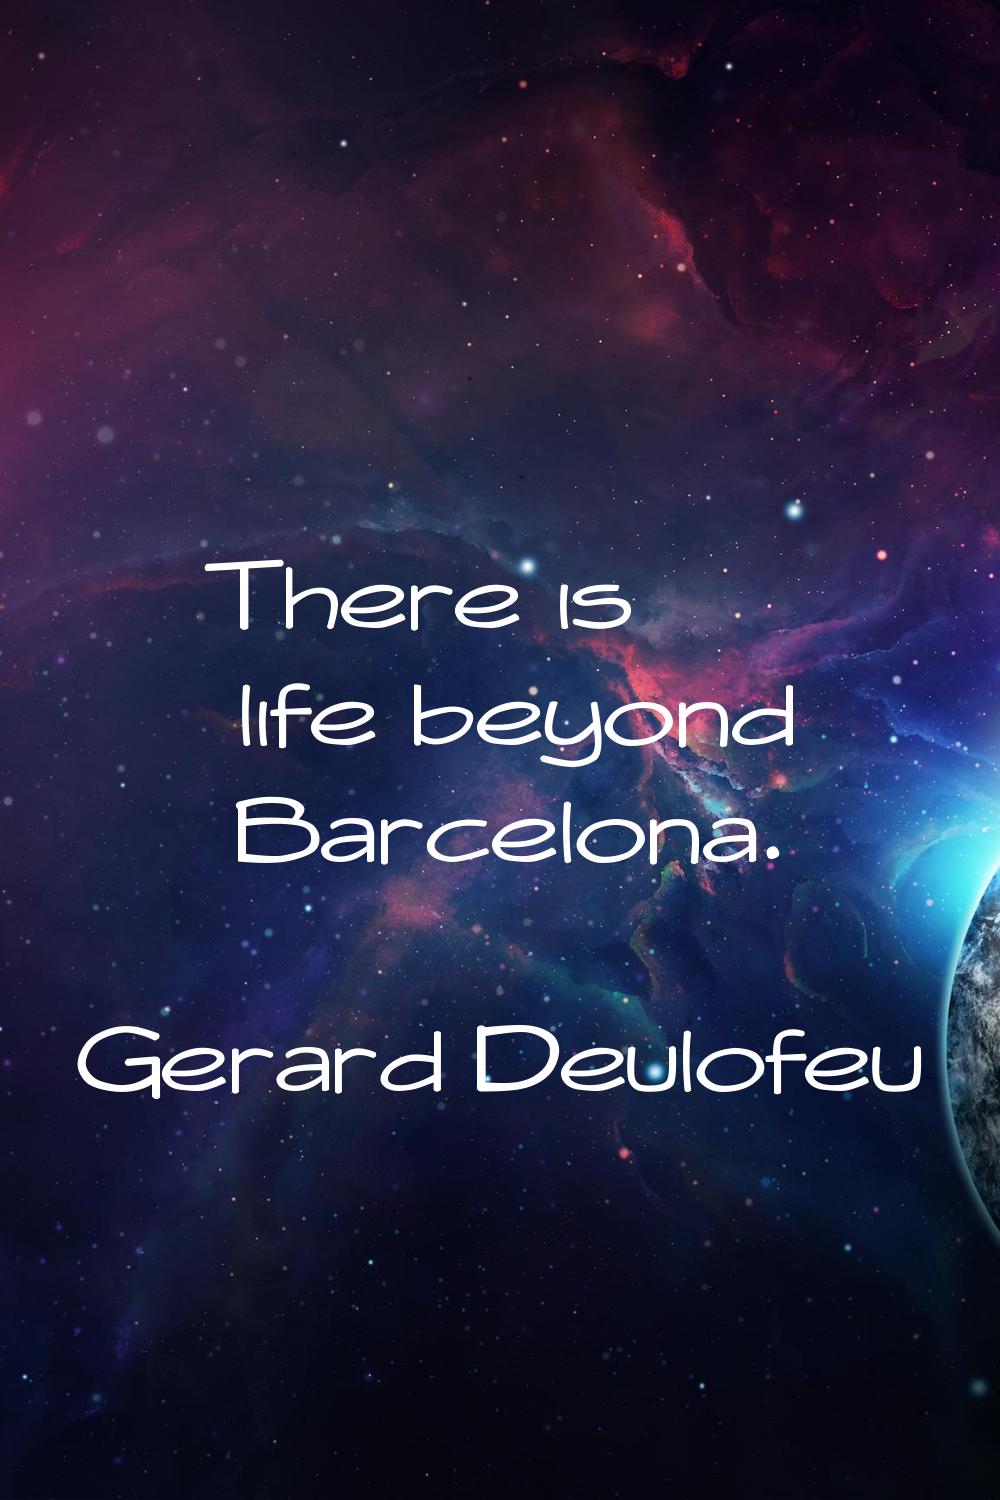 There is life beyond Barcelona.